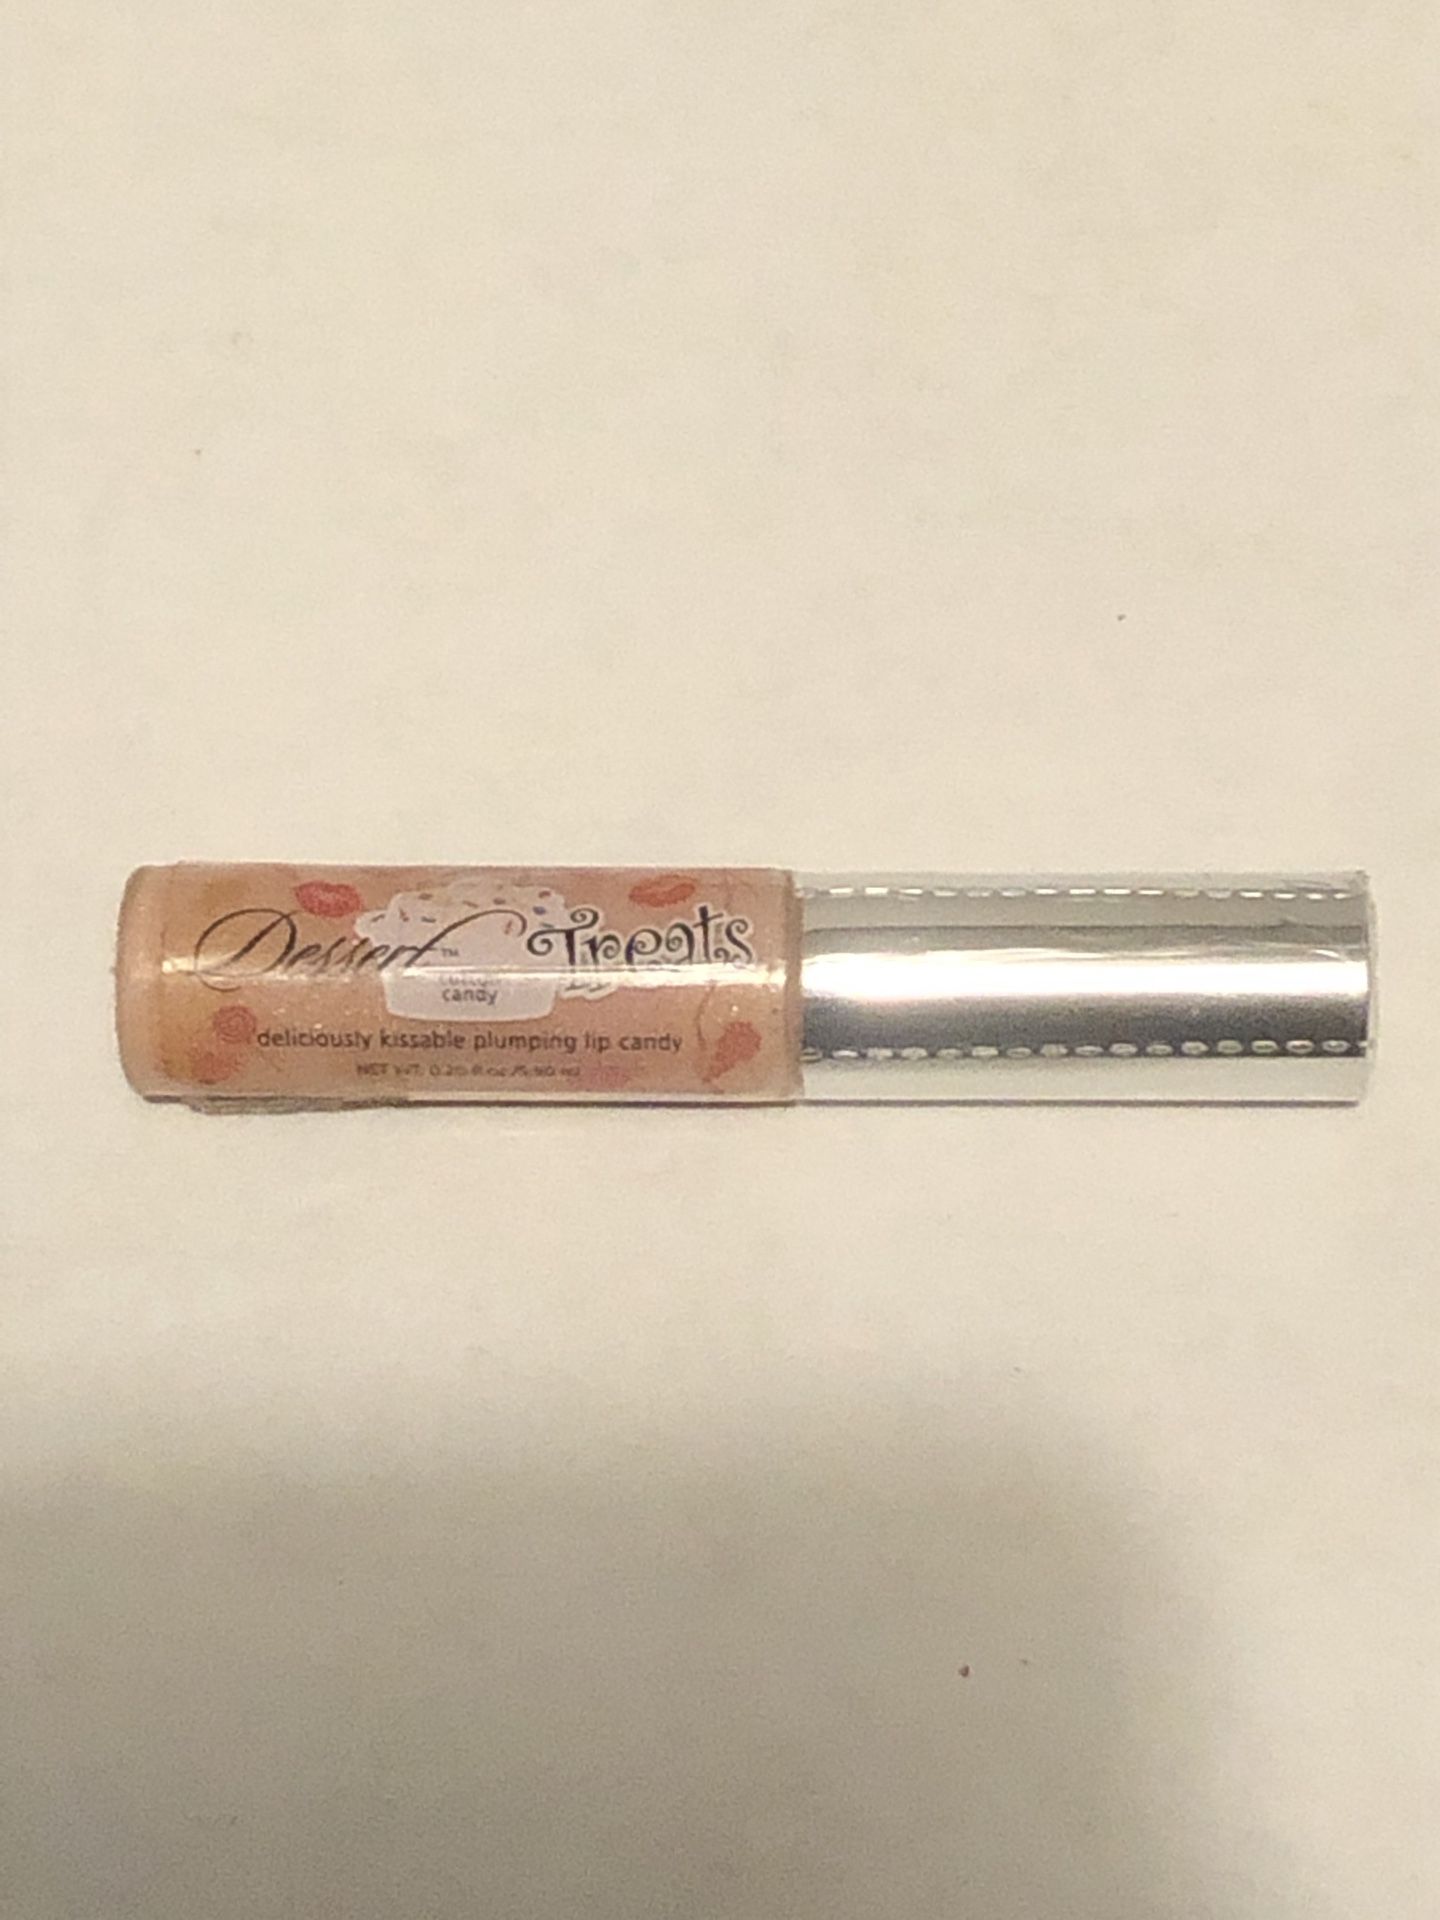 1 Jessica Simpson Desert Treats Cotton Candy Deliciously Kissable Plumping Lip Candy